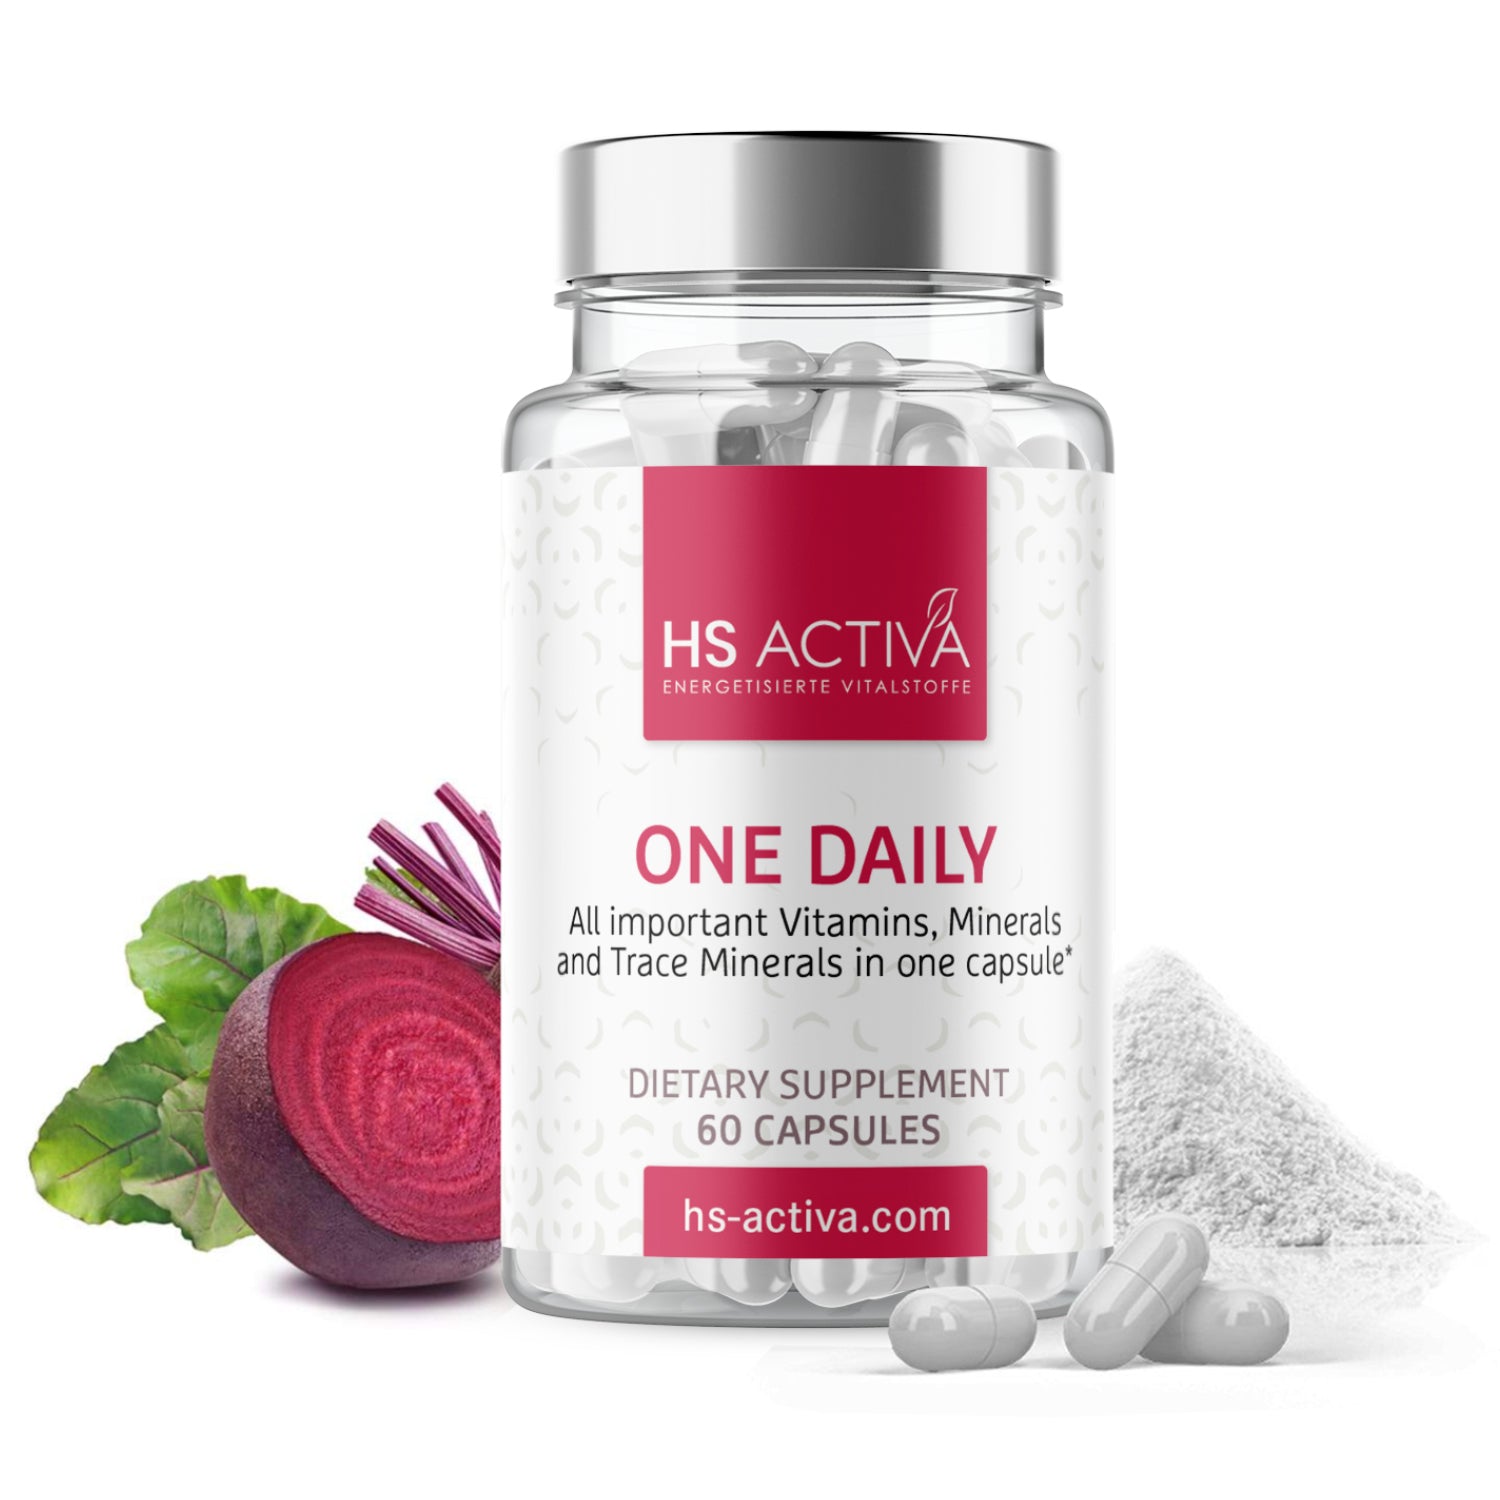 One Daily - All important Vitamins, Minerals and Trace Minerals in one capsule (60 Capsules)